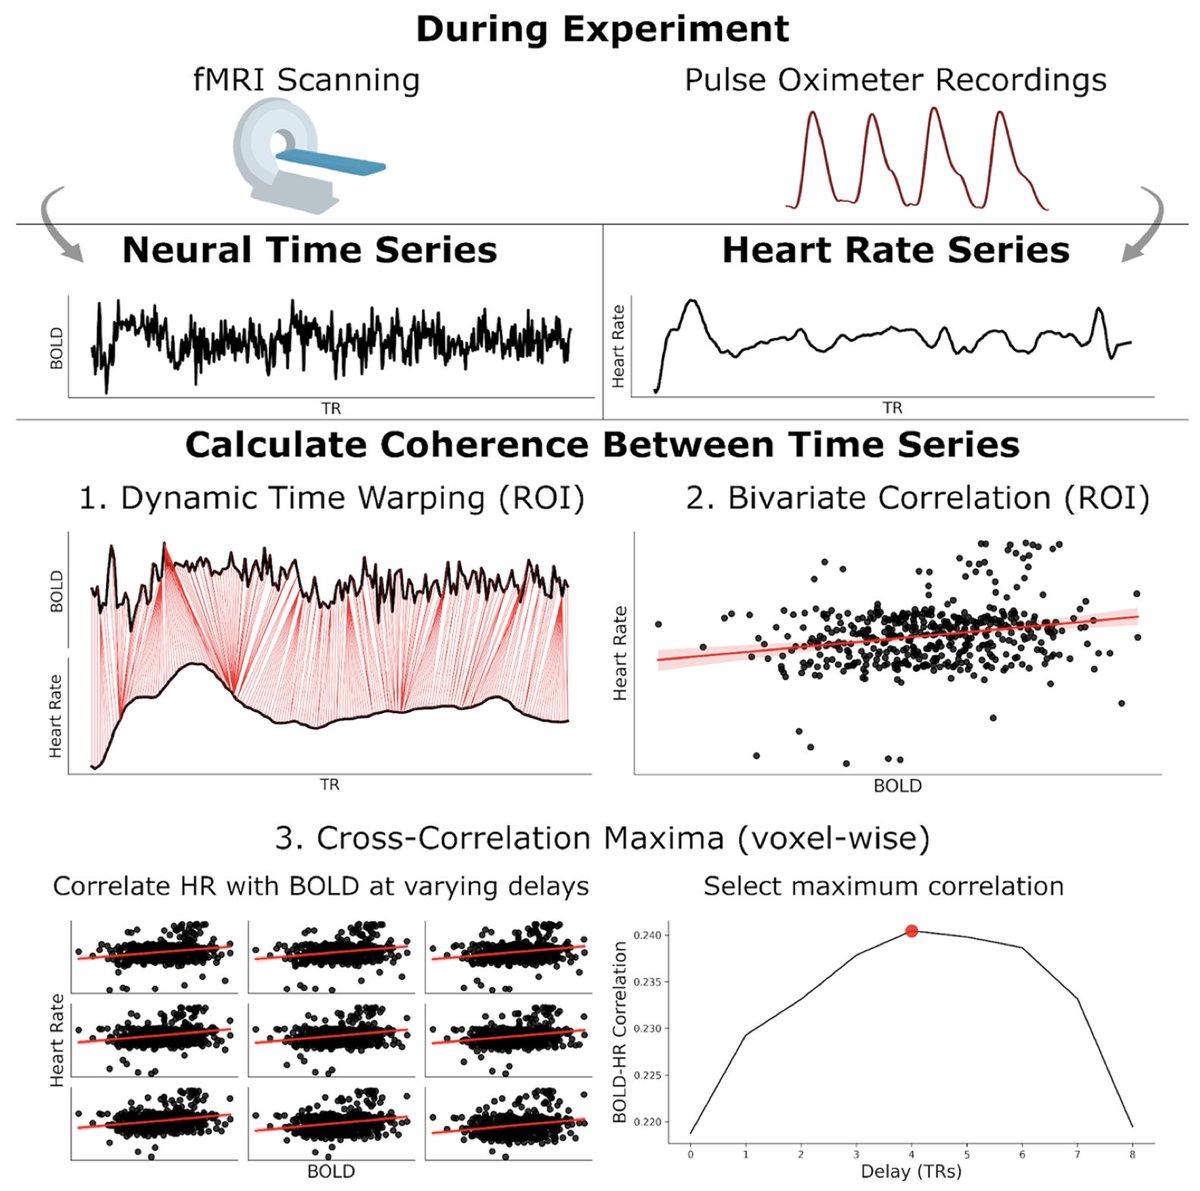 New paper in Imaging Neuroscience by Peter A. Kirk and Oliver J. Robinson: Preliminary evidence for altered brain-heart coherence during anxiogenic movies doi.org/10.1162/imag_a…